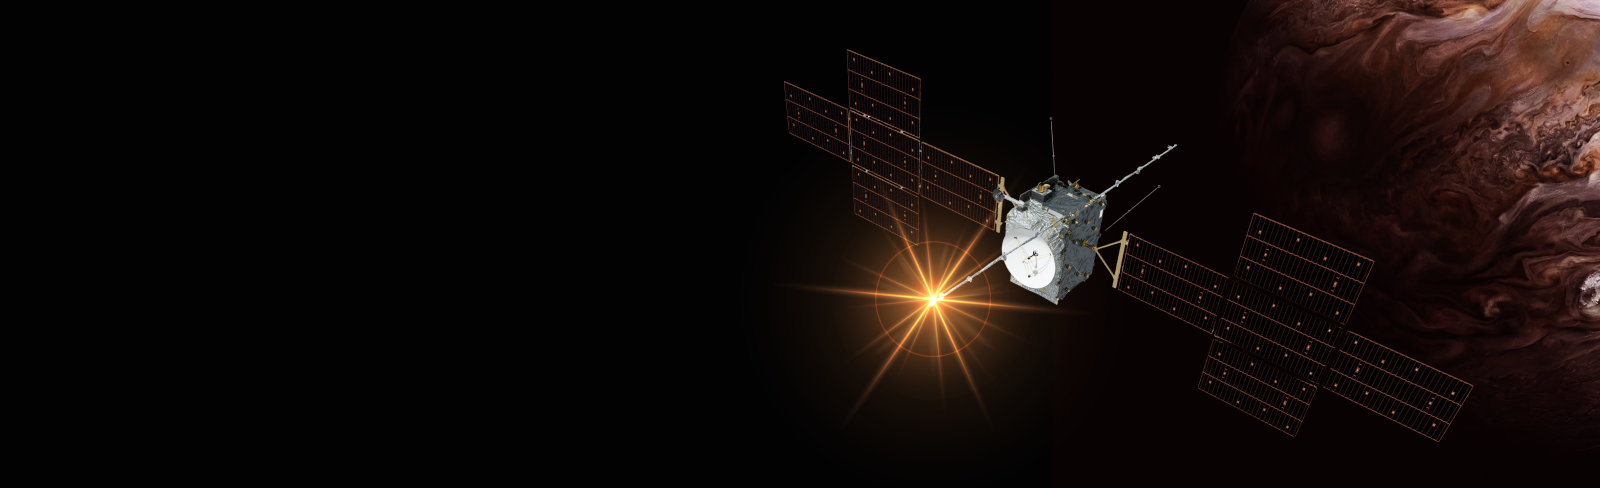 BAE Systems technology to support European Space Agency mission to Jupiter's icy moons banner image